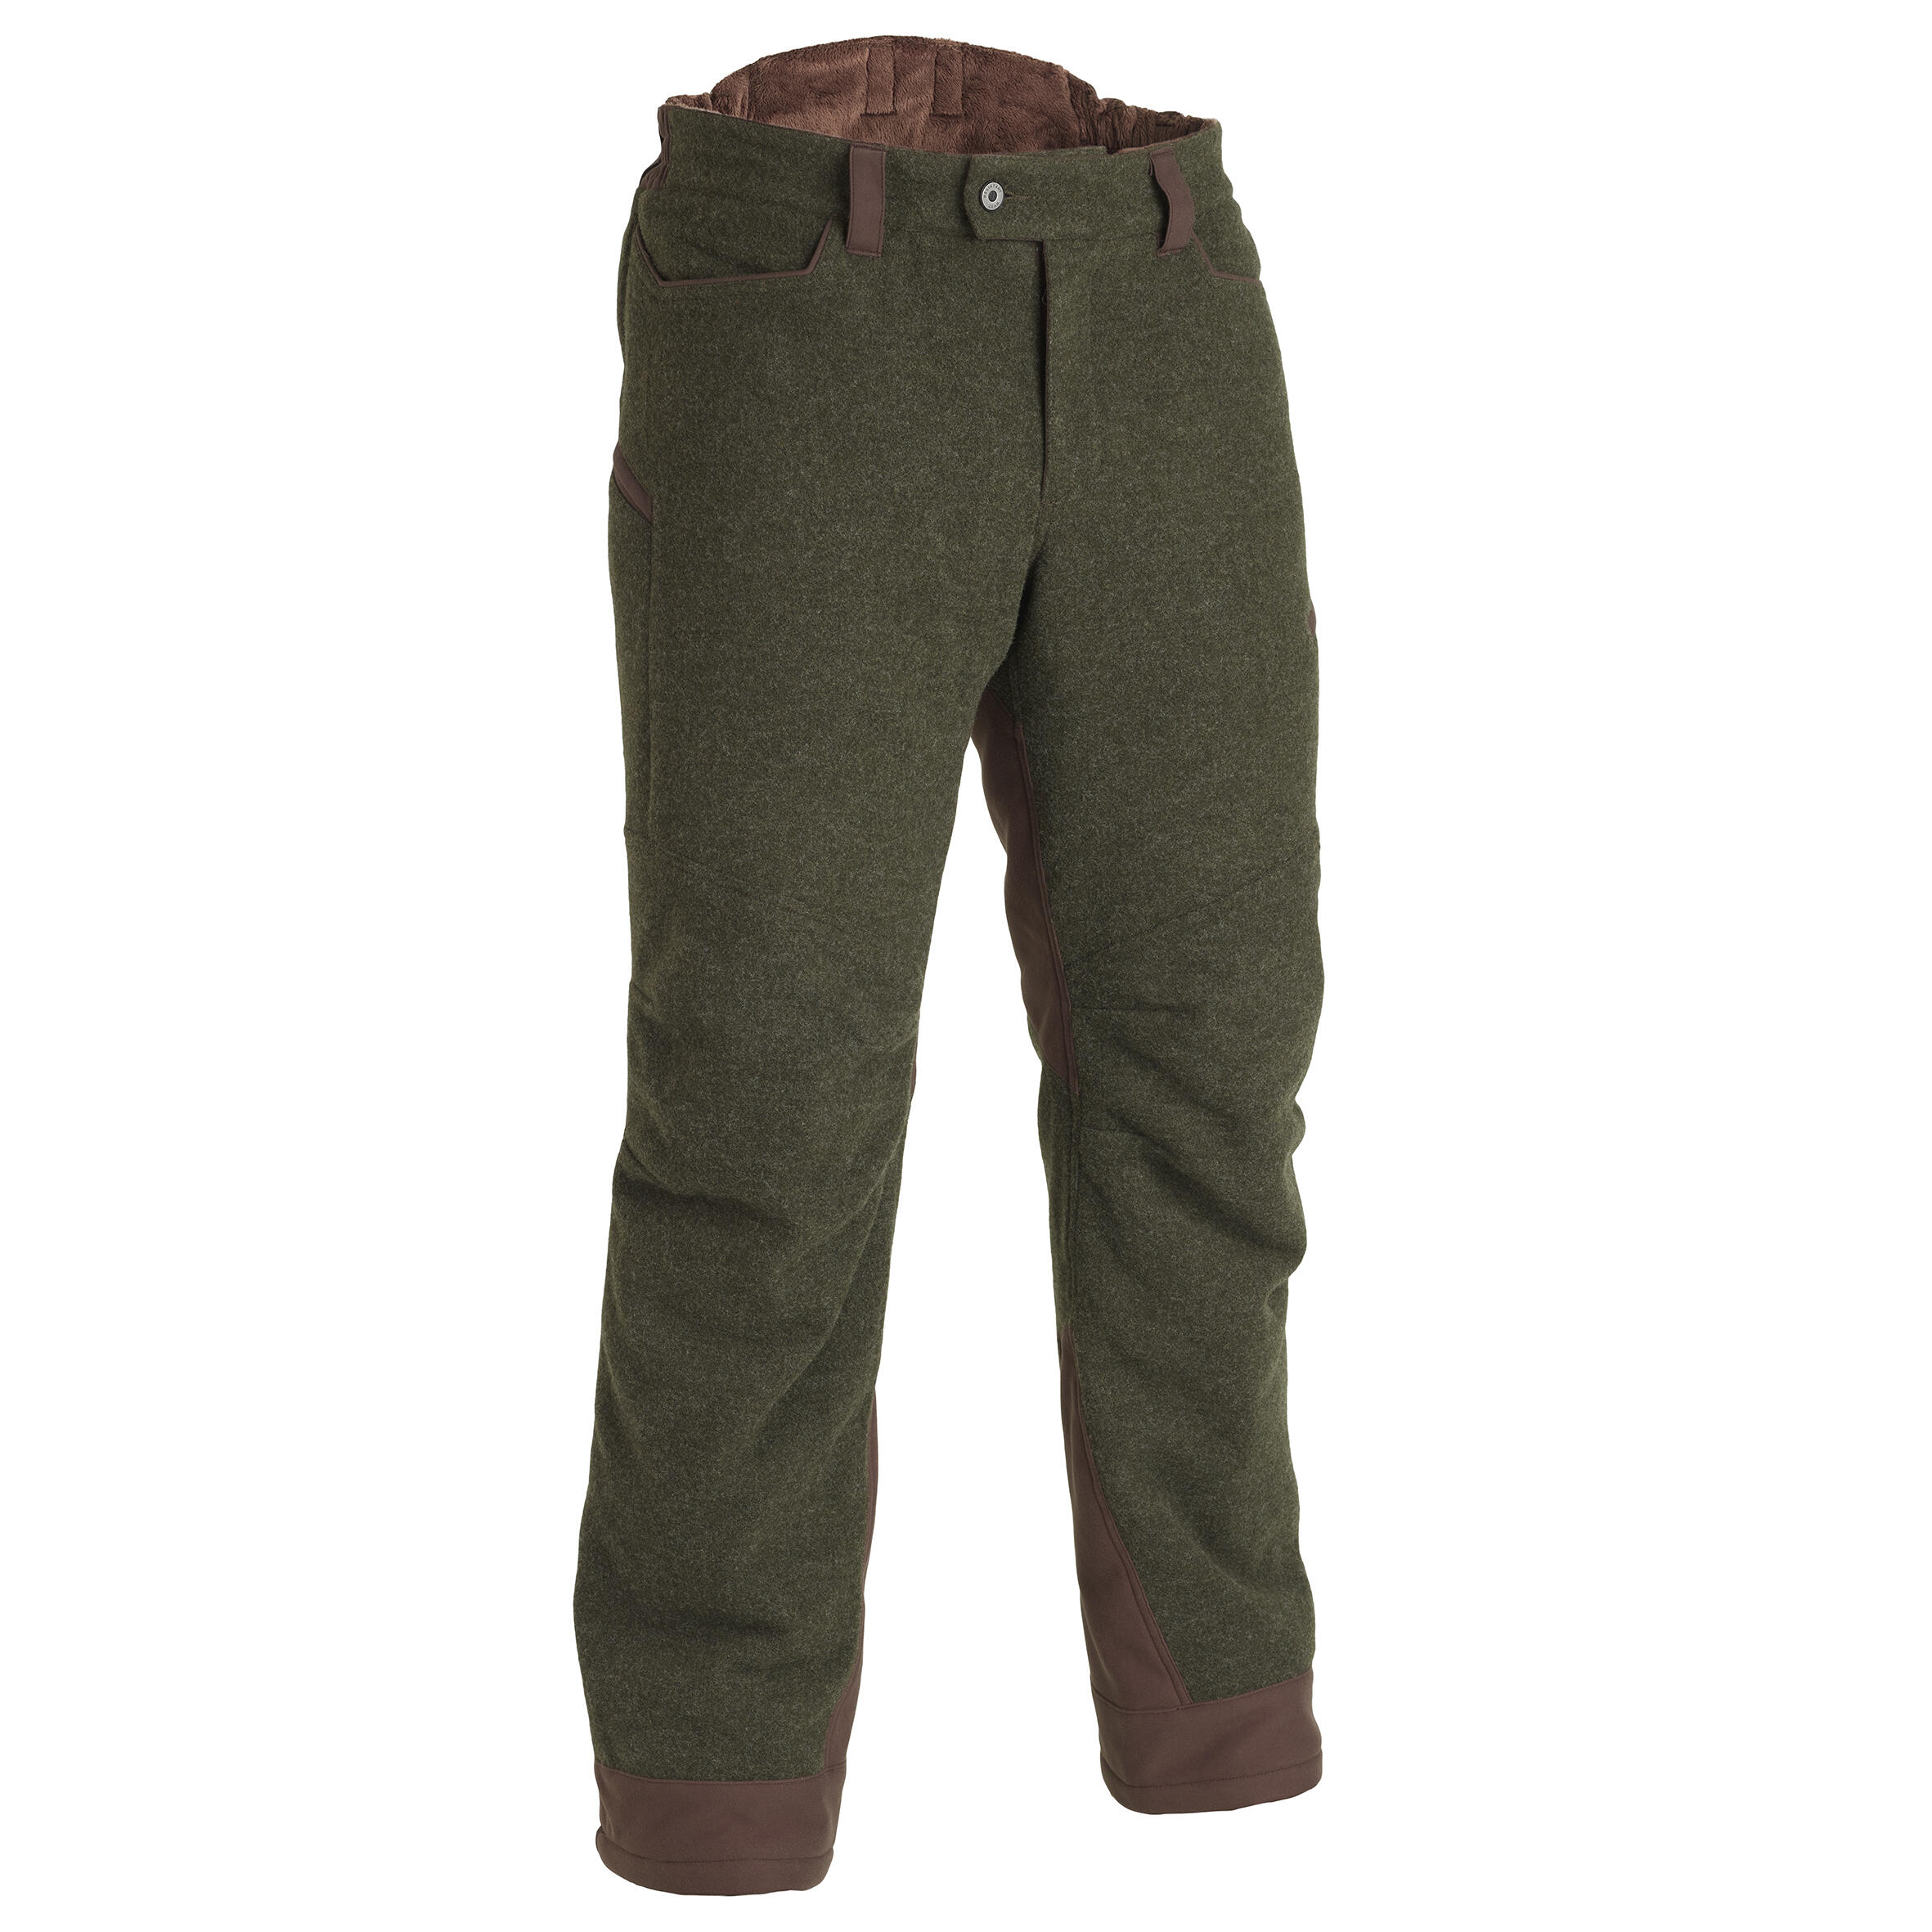 HUNTING WARM SILENT WOOL TROUSERS 900 - GREEN 1/11